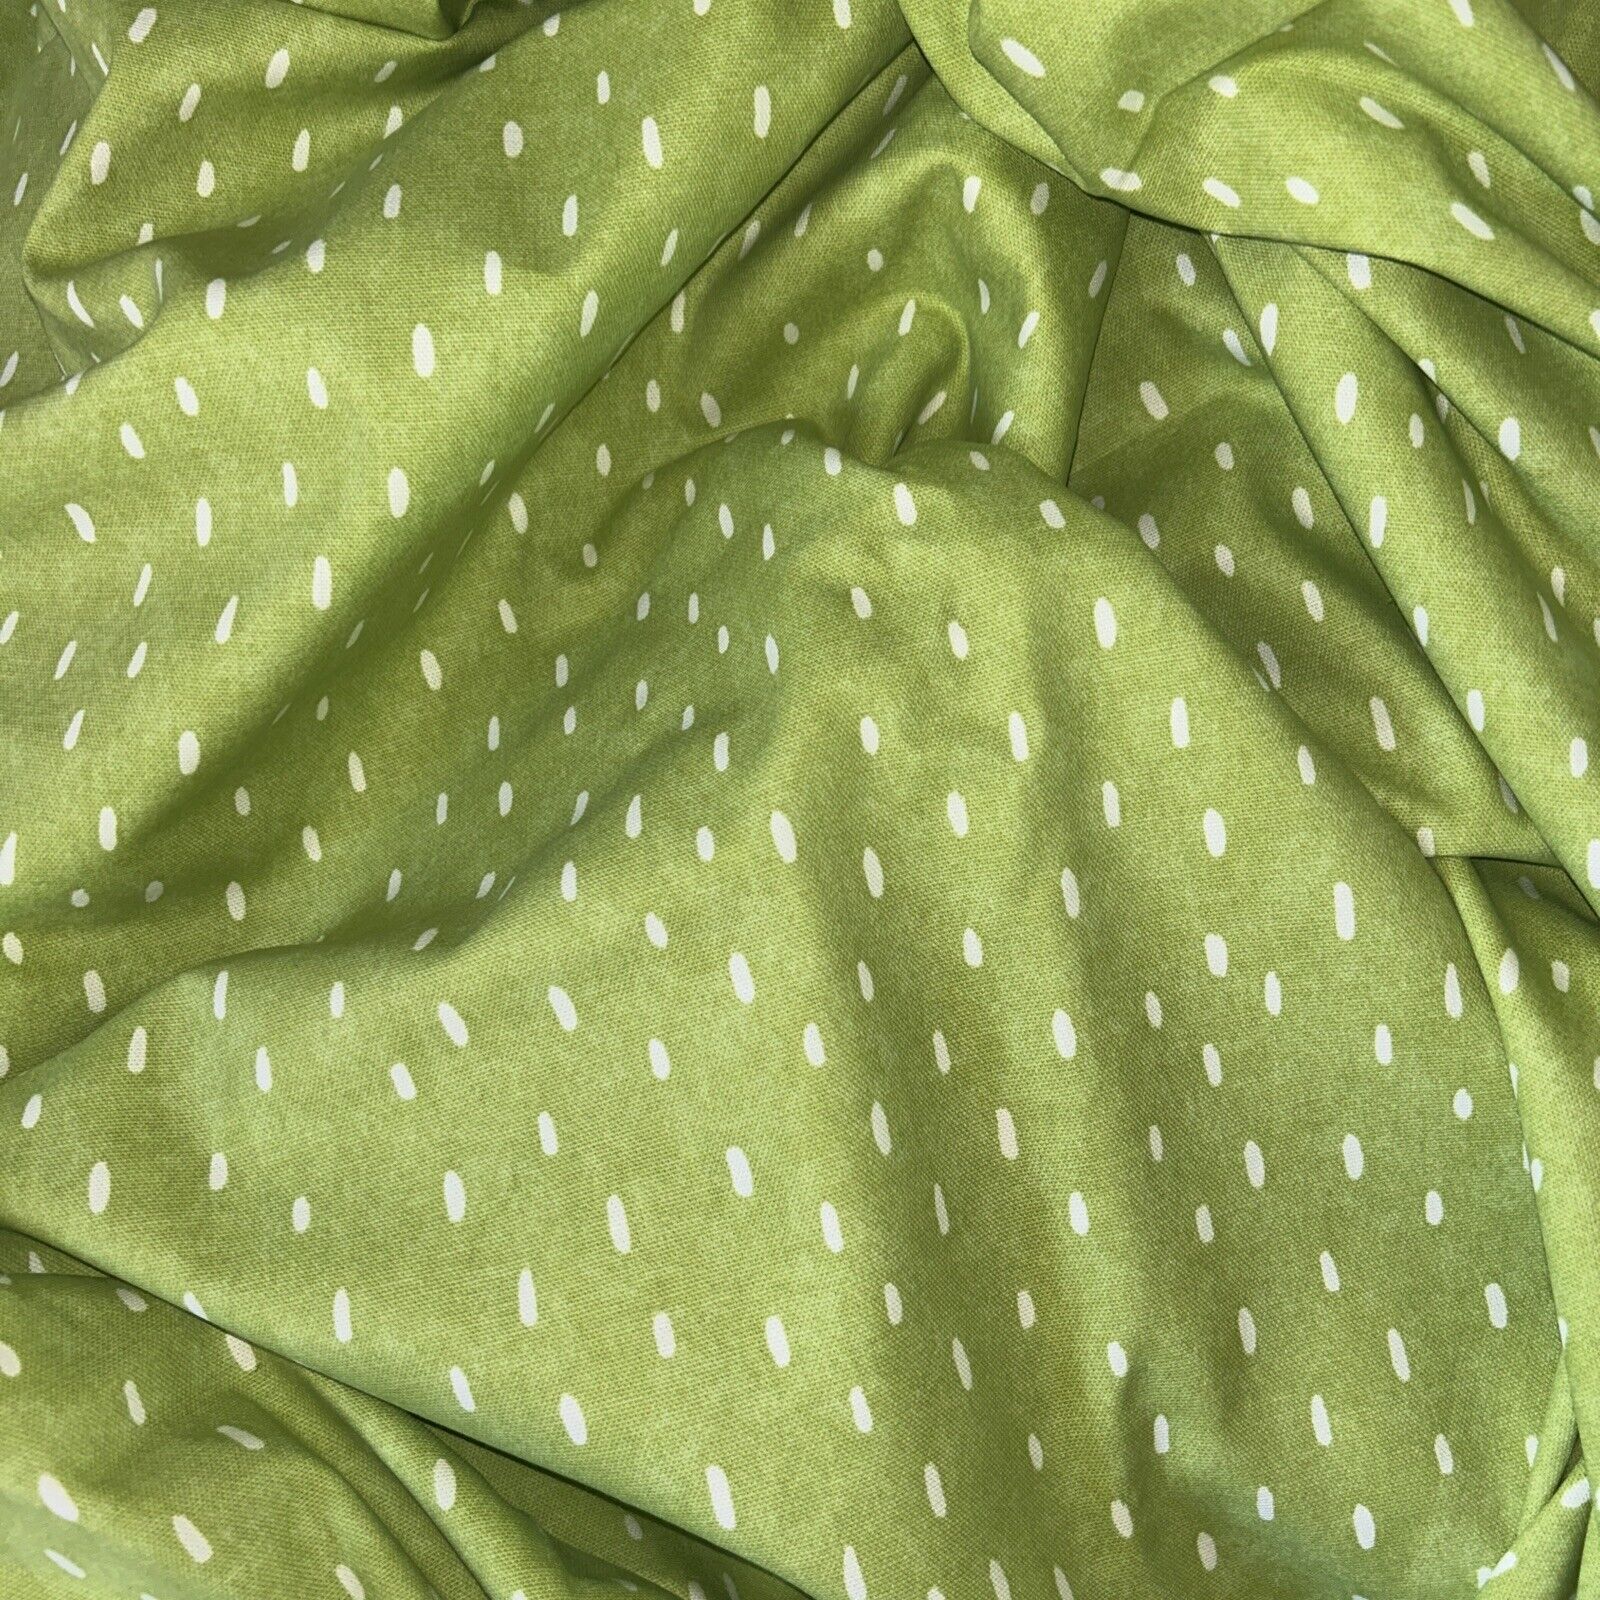 6 yards x 54 inches Lime Green   Polka Dot Drapery Fabric 100% cotton unused